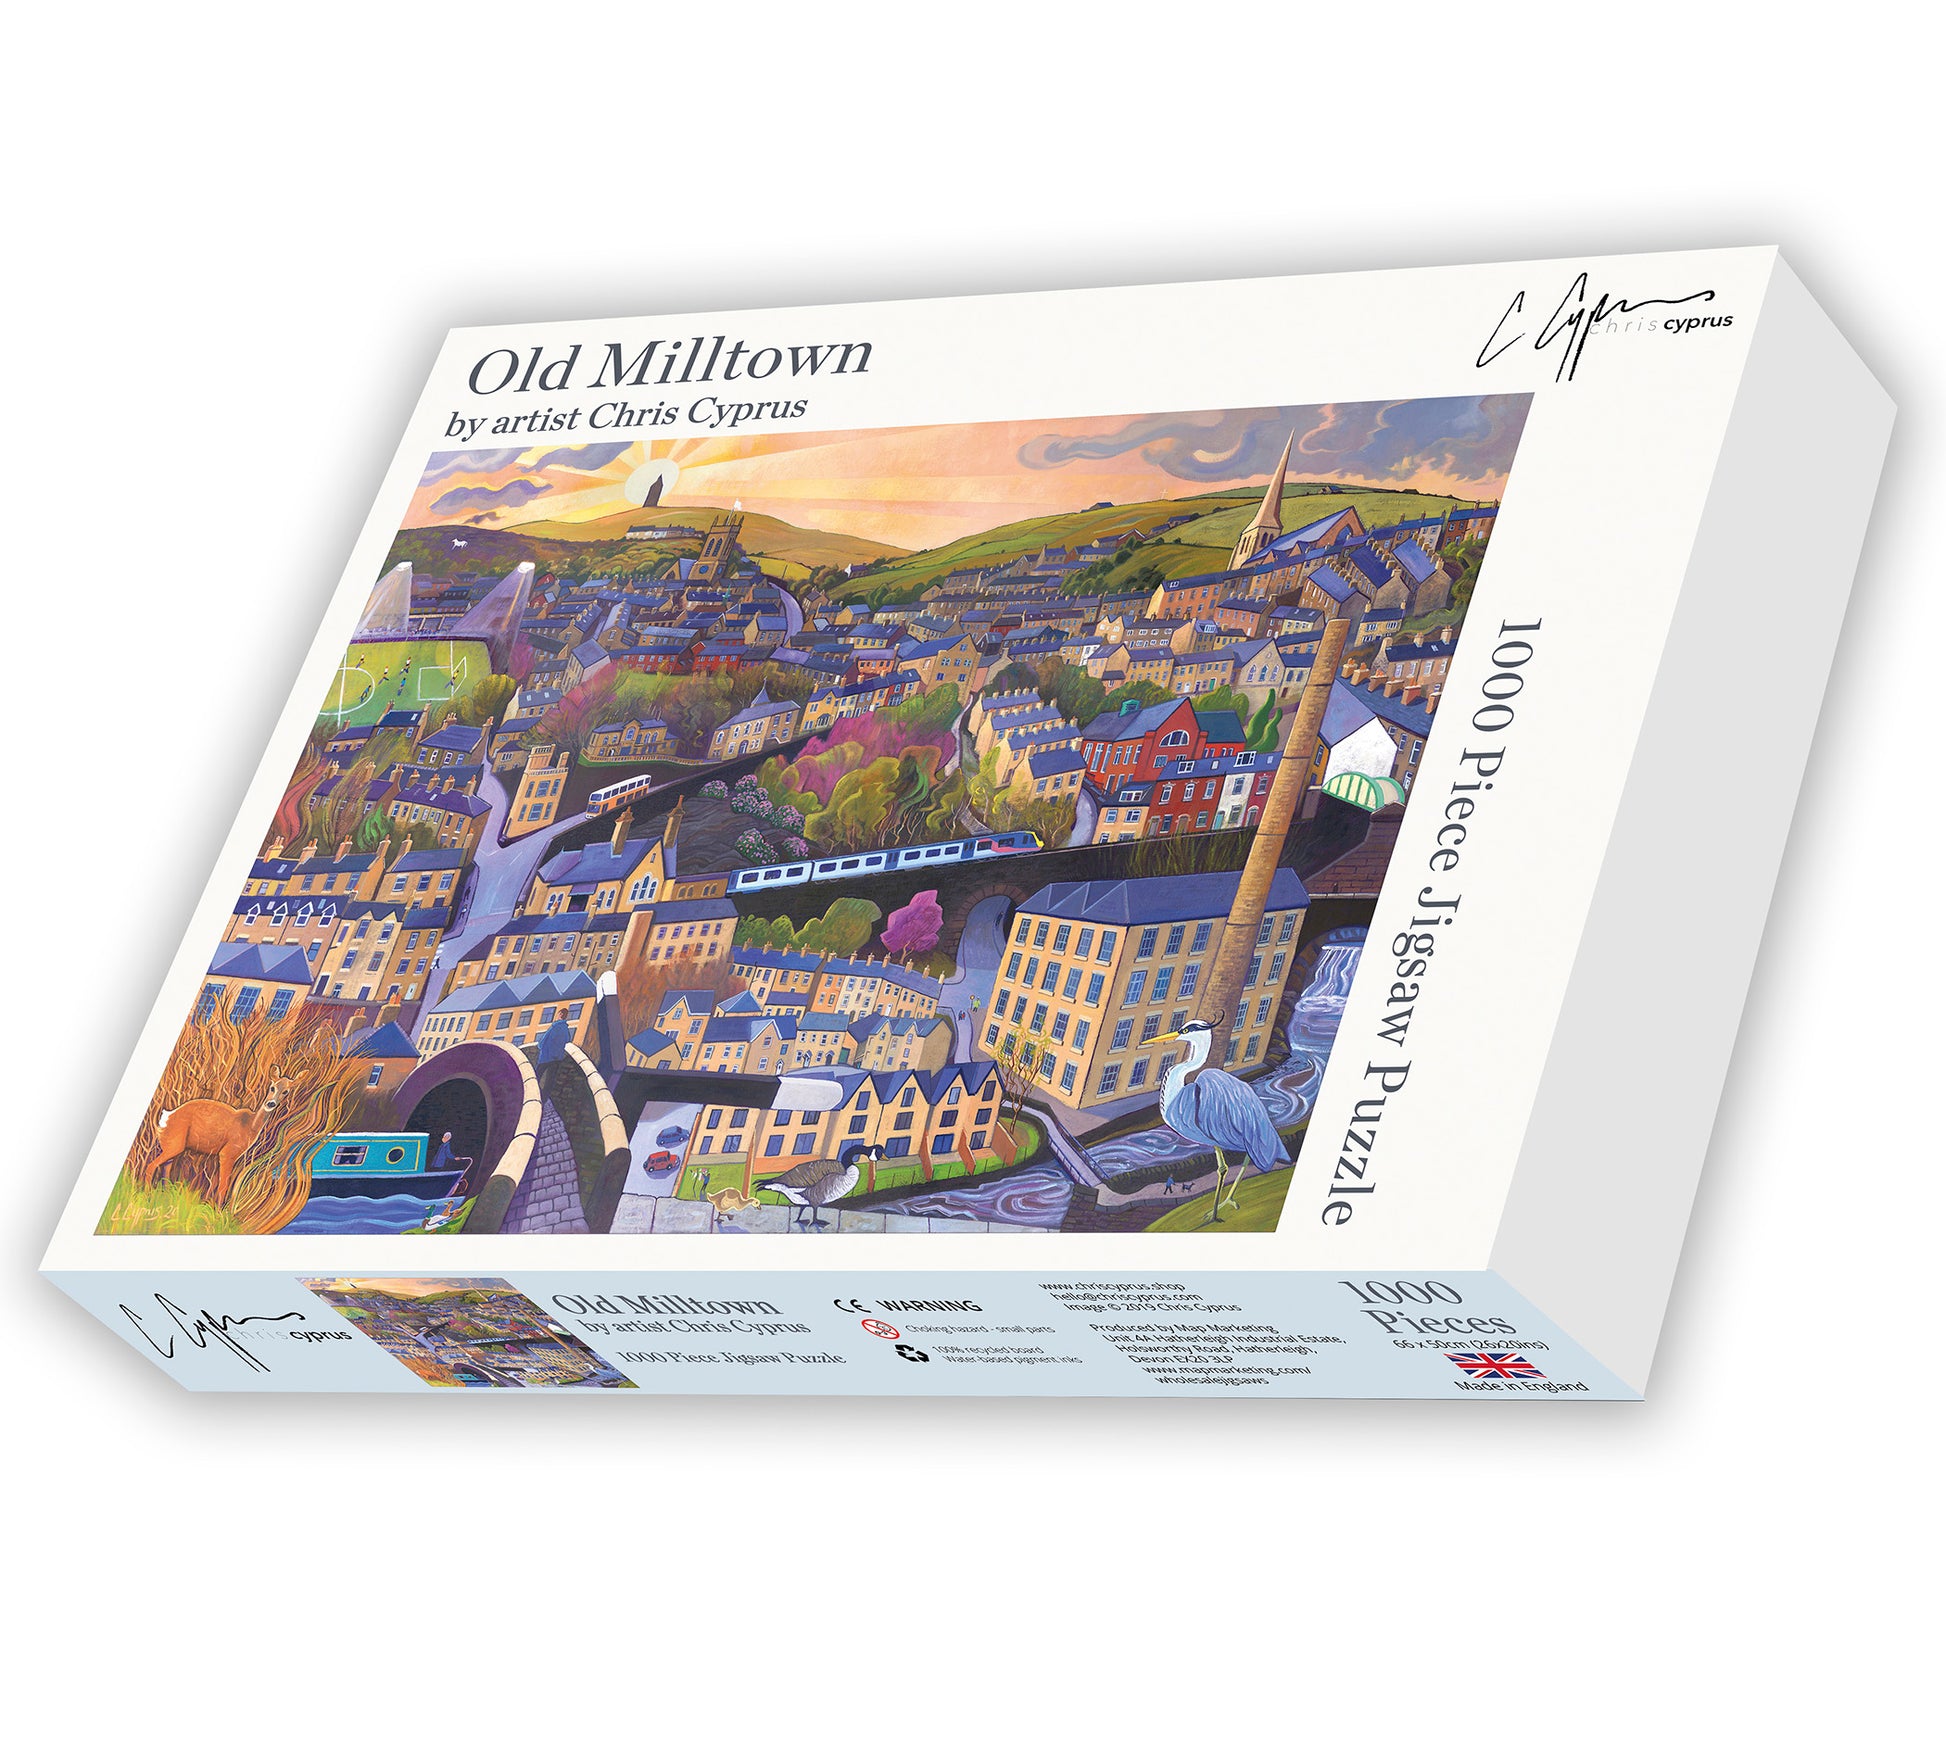 Old Milltown 1000 piece jigsaw by Artist Chris Cyprus features a scene from the painting 'Old Milltown' the town where chris grew up. Limited jigsaws available.